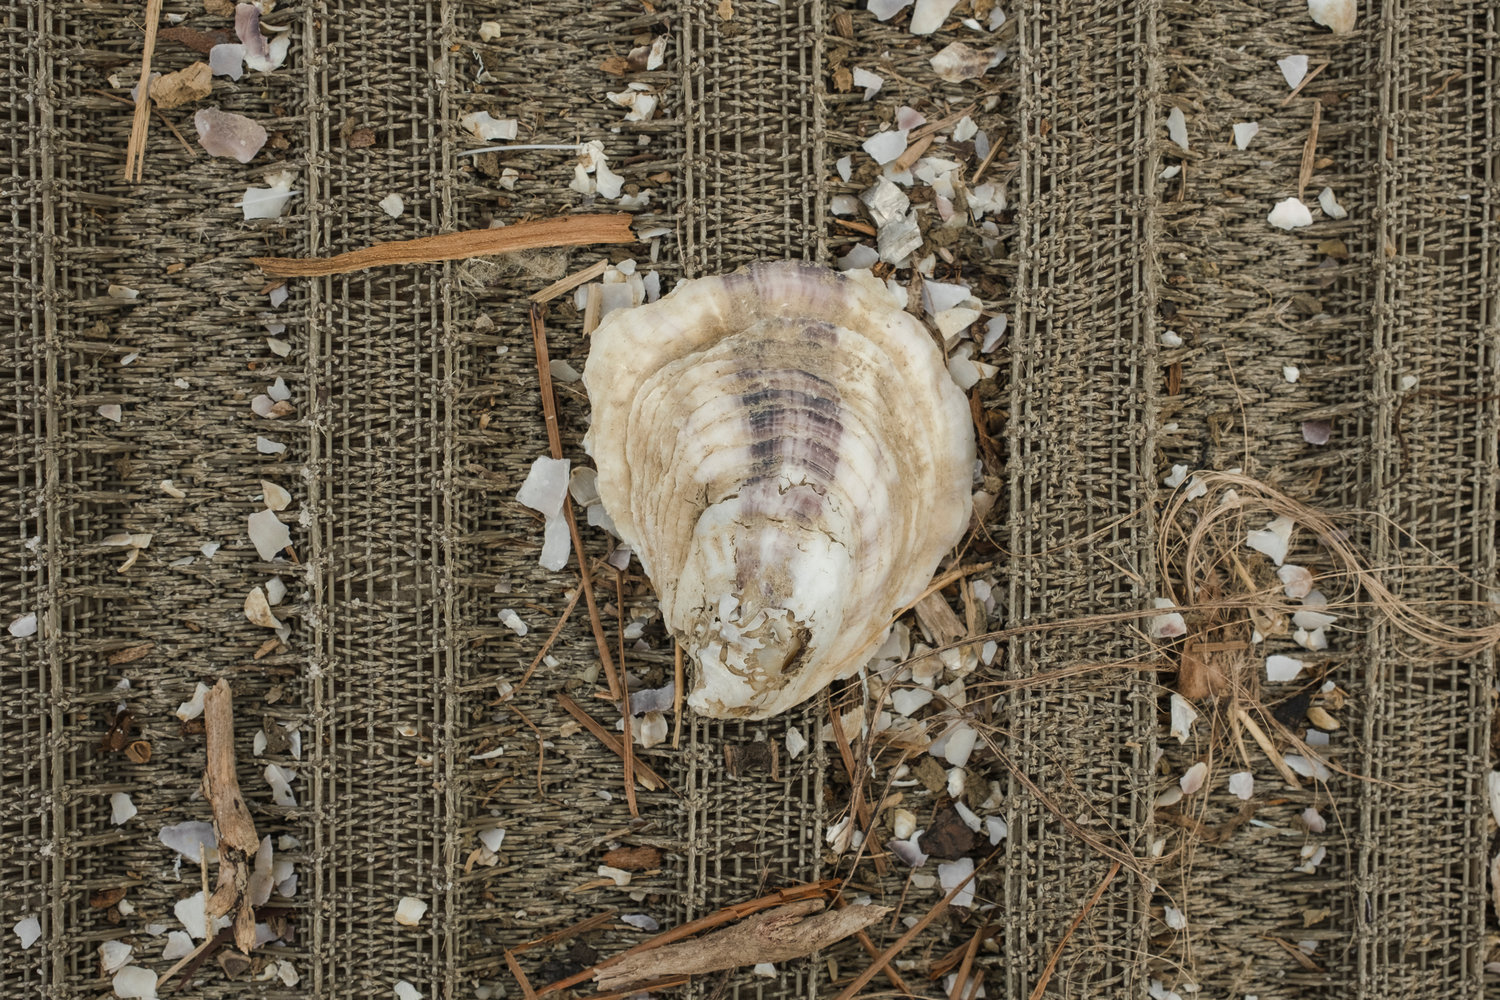 A Navy Cove oyster shell.